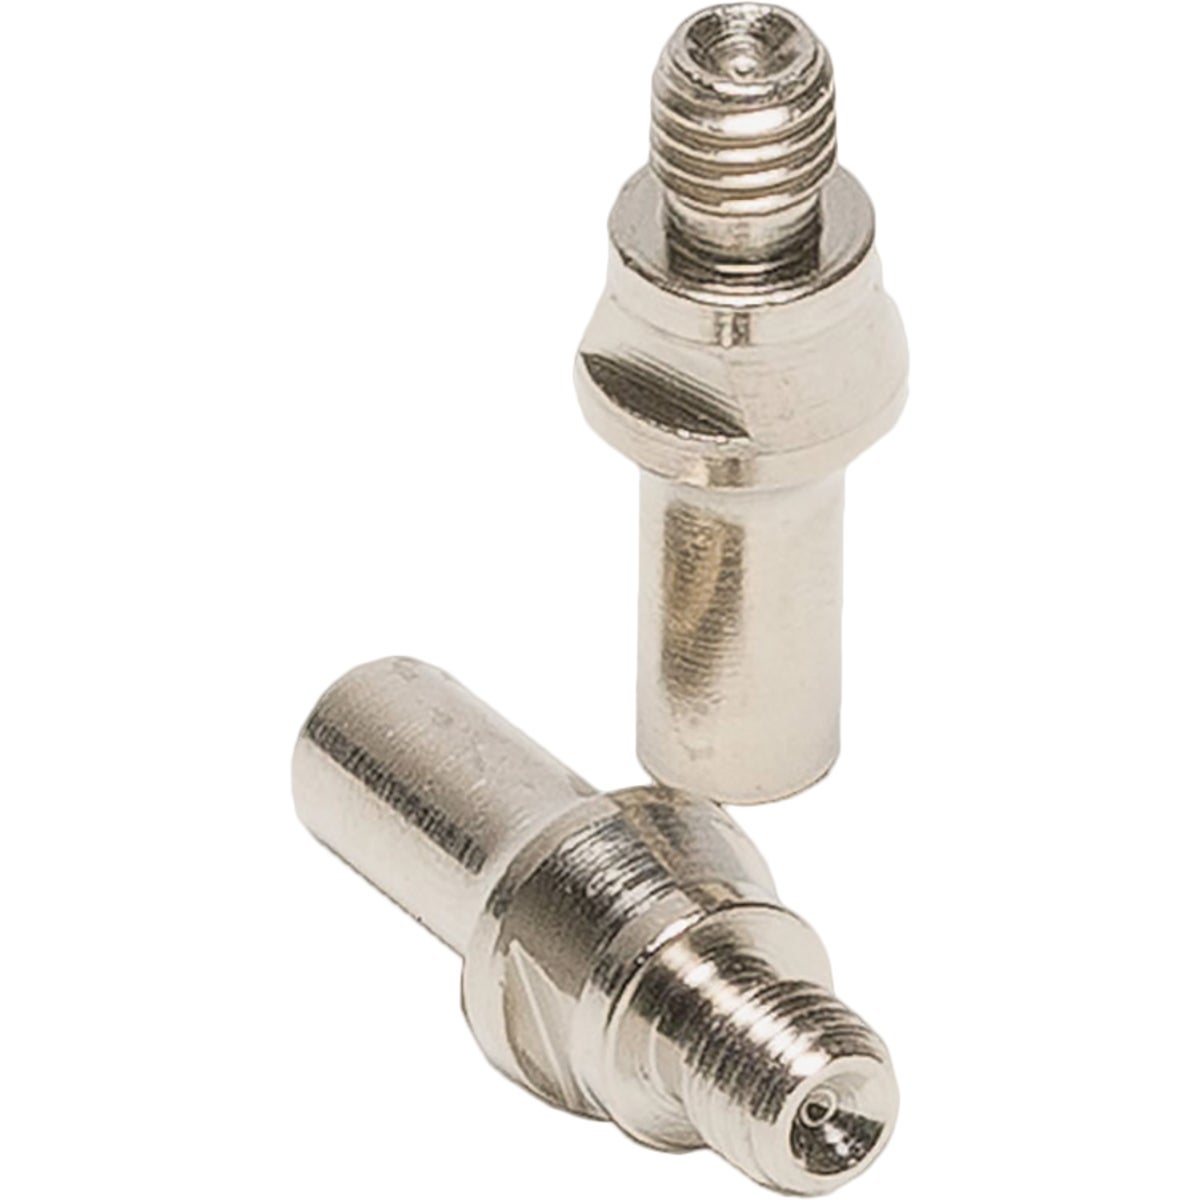 Forney Cutter Electrode Plasma Cutter Accessory (2-Pack)